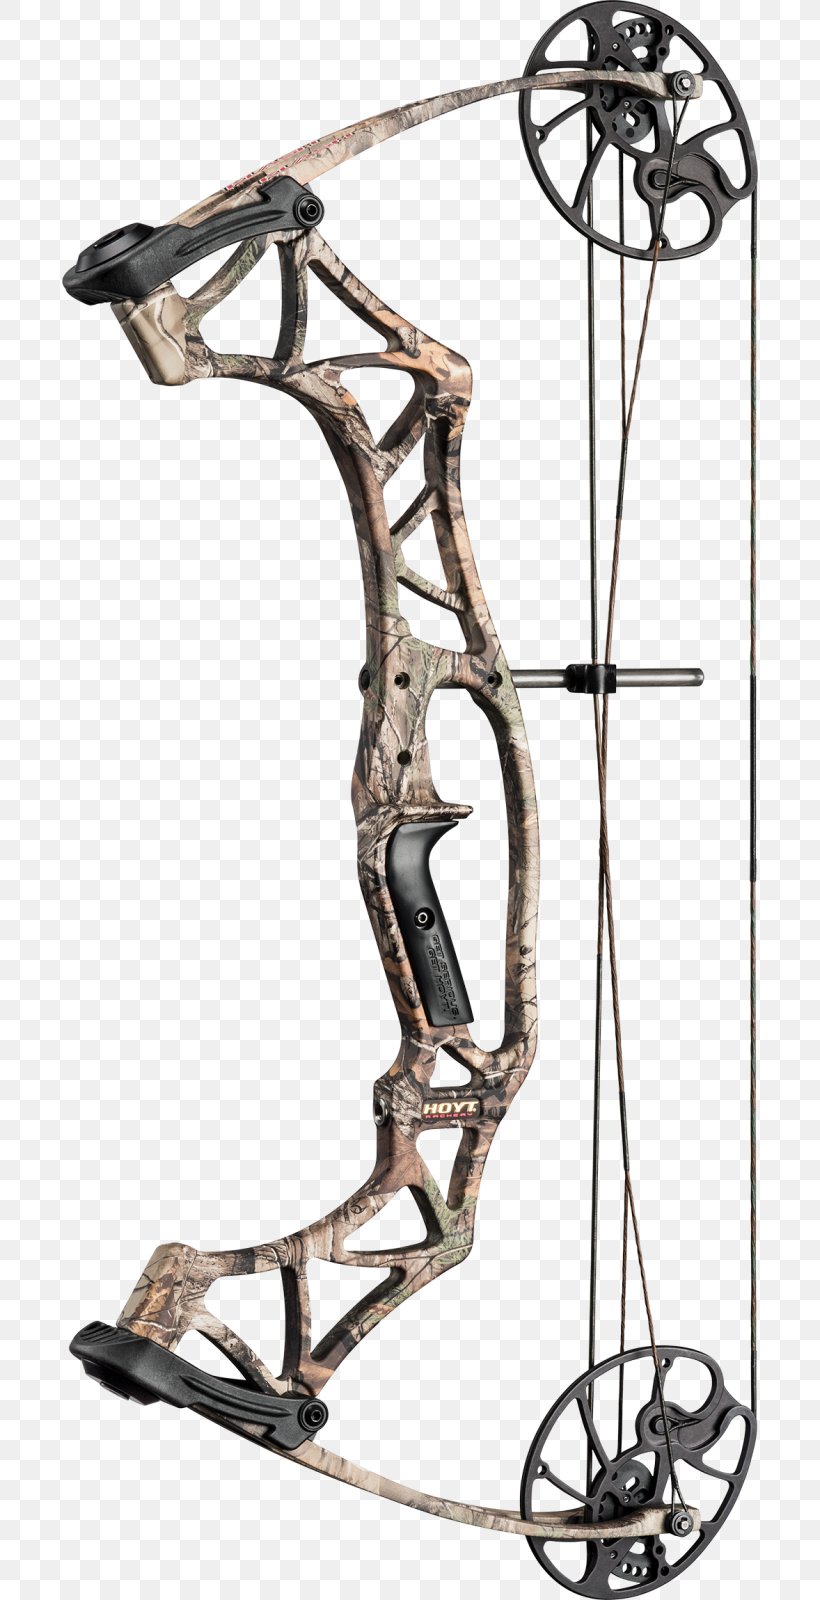 Bow And Arrow Compound Bows Archery Bowhunting, PNG, 696x1600px, Bow And Arrow, Advanced Archery, Archery, Bow, Bowhunting Download Free